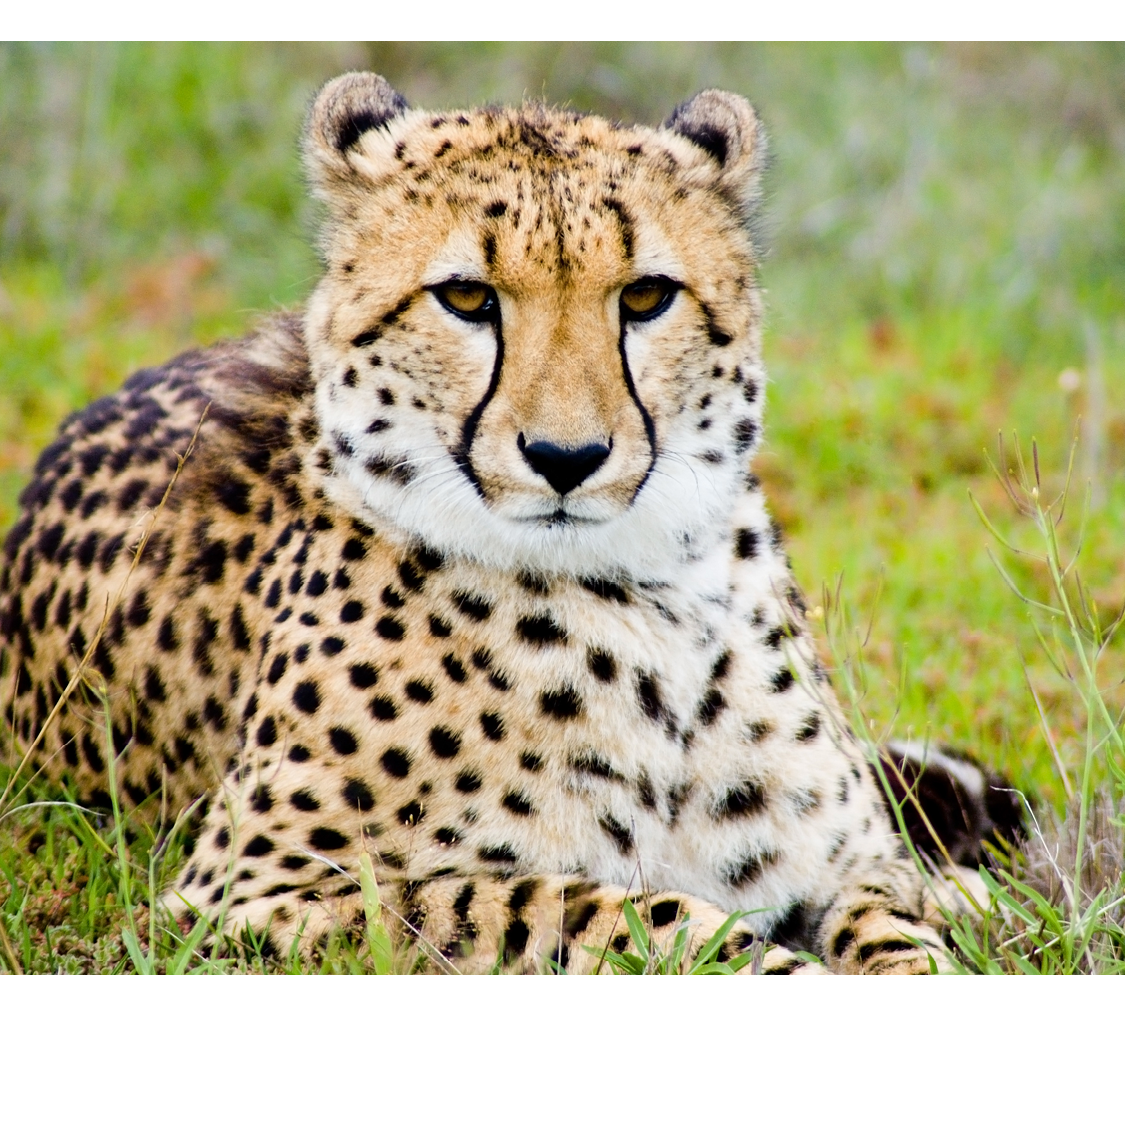 Adult cheetahs weigh from 45 to 160 pounds and are 65 to 100 inches long from - photo 5